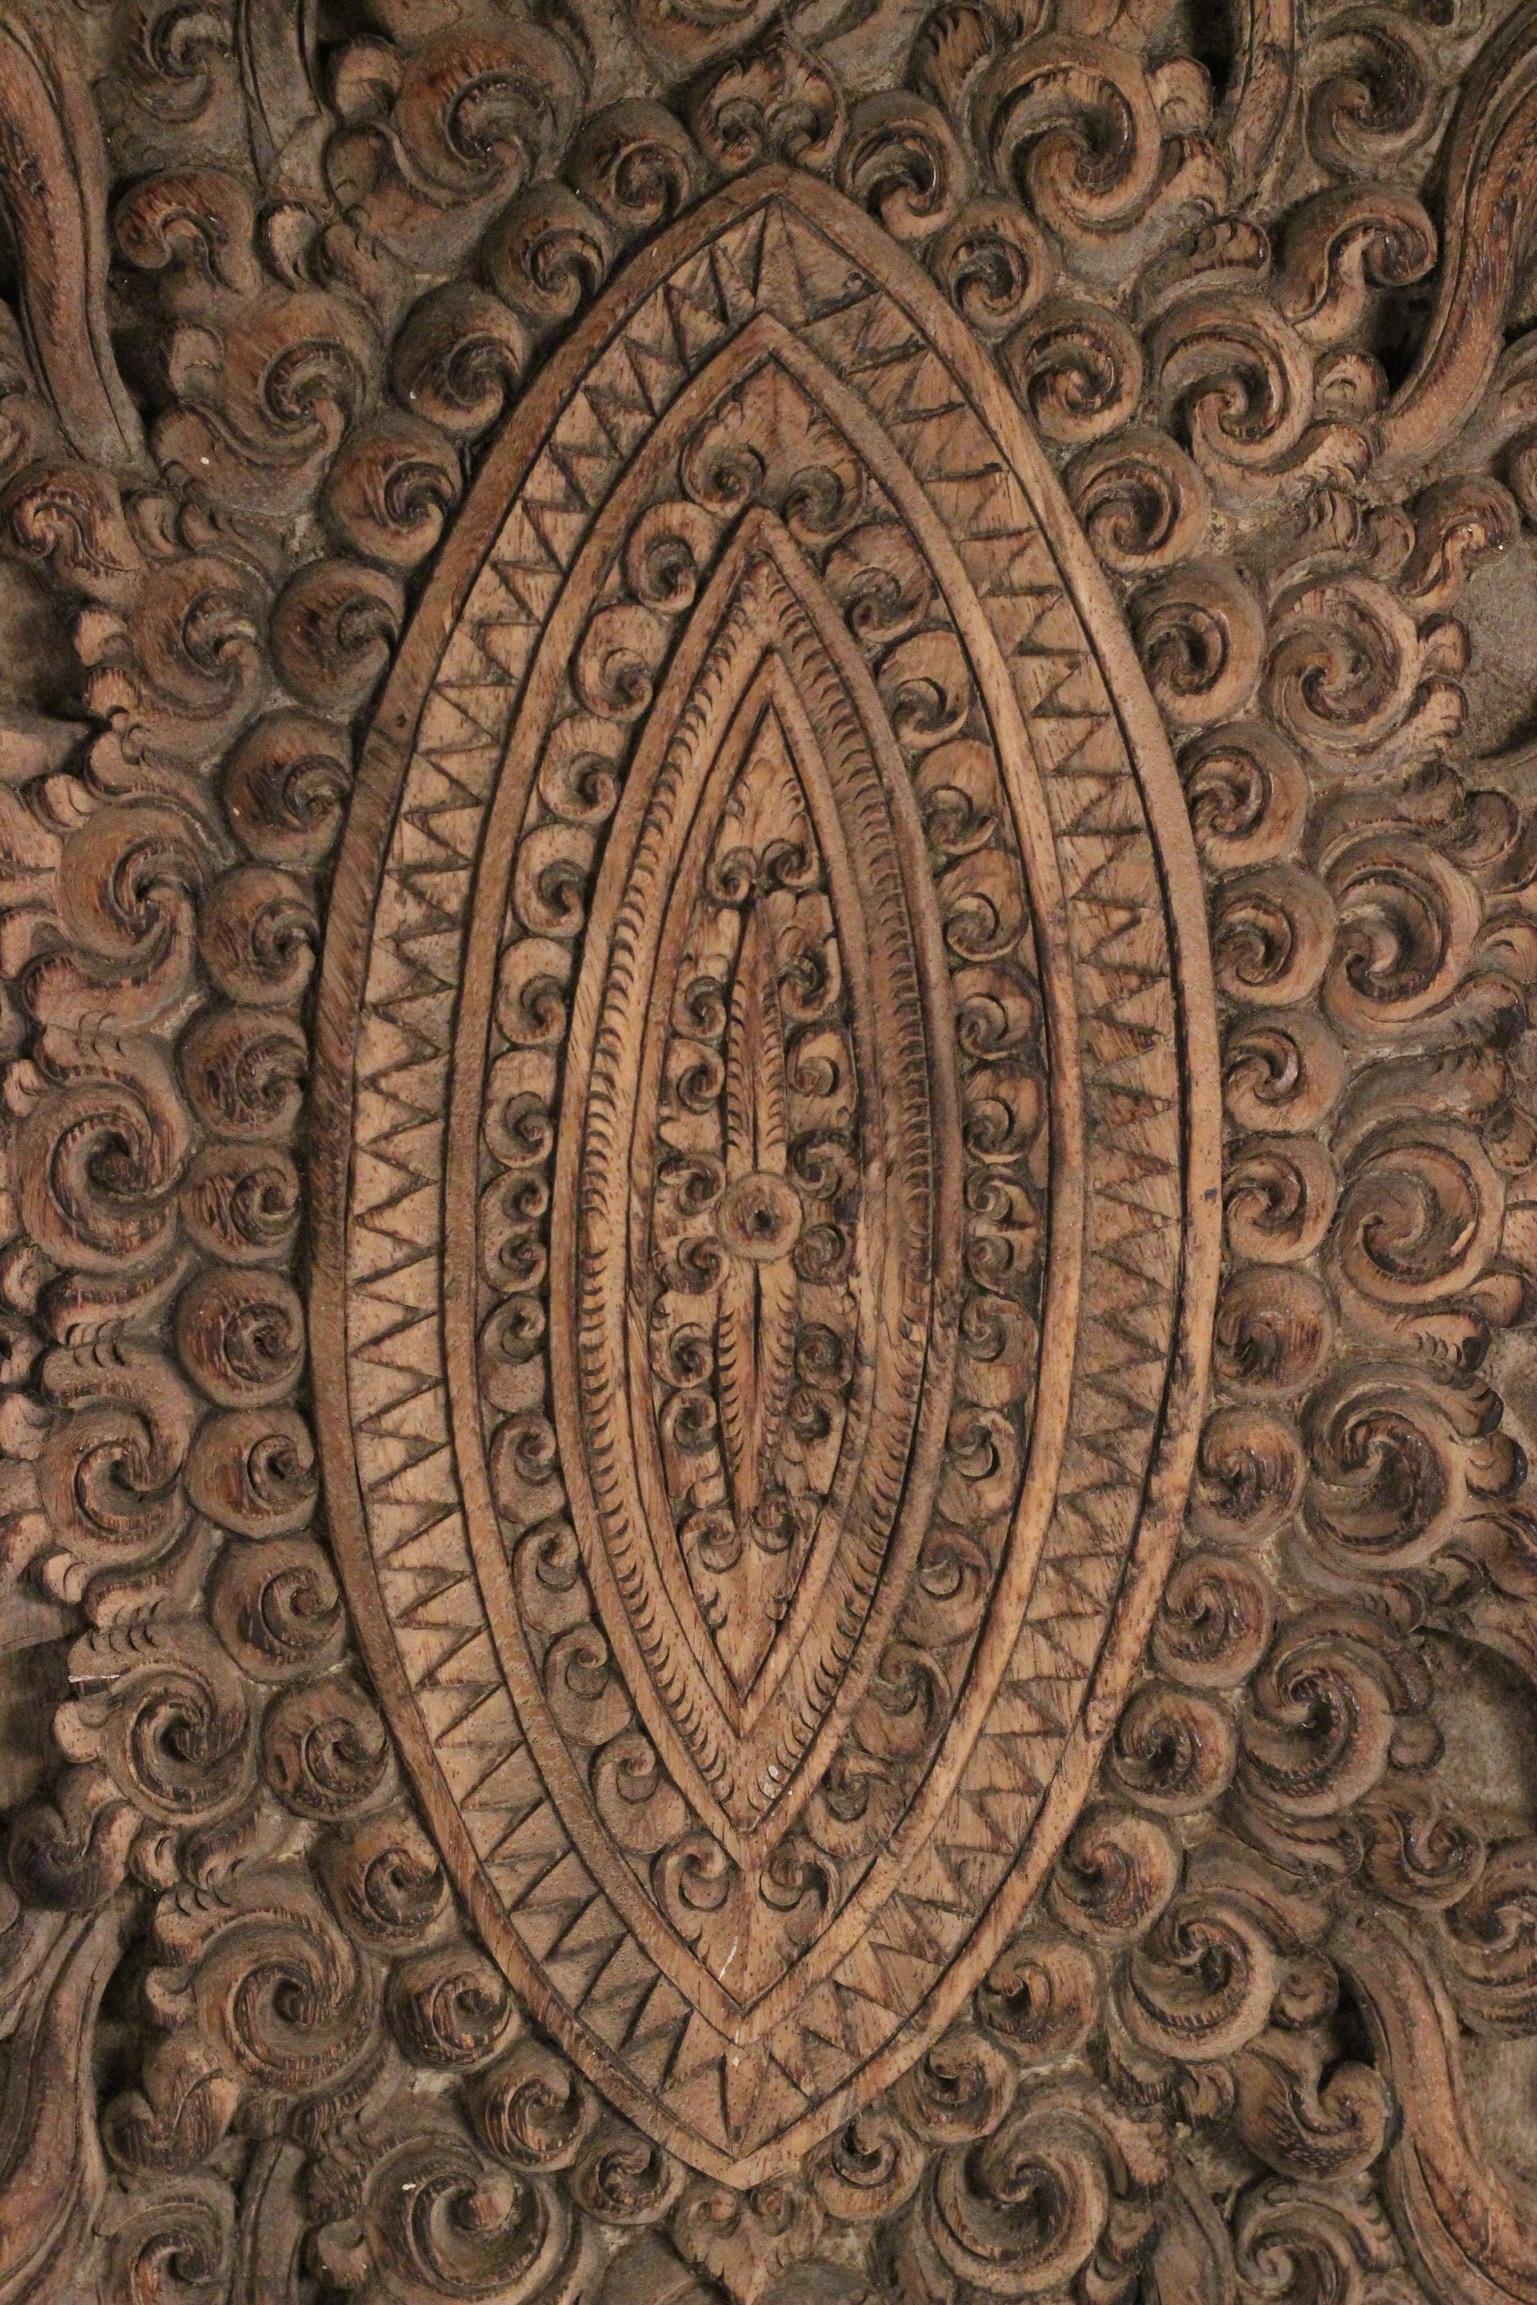 Hand-Carved 19th Century Hand Carved Balinese Temple Door